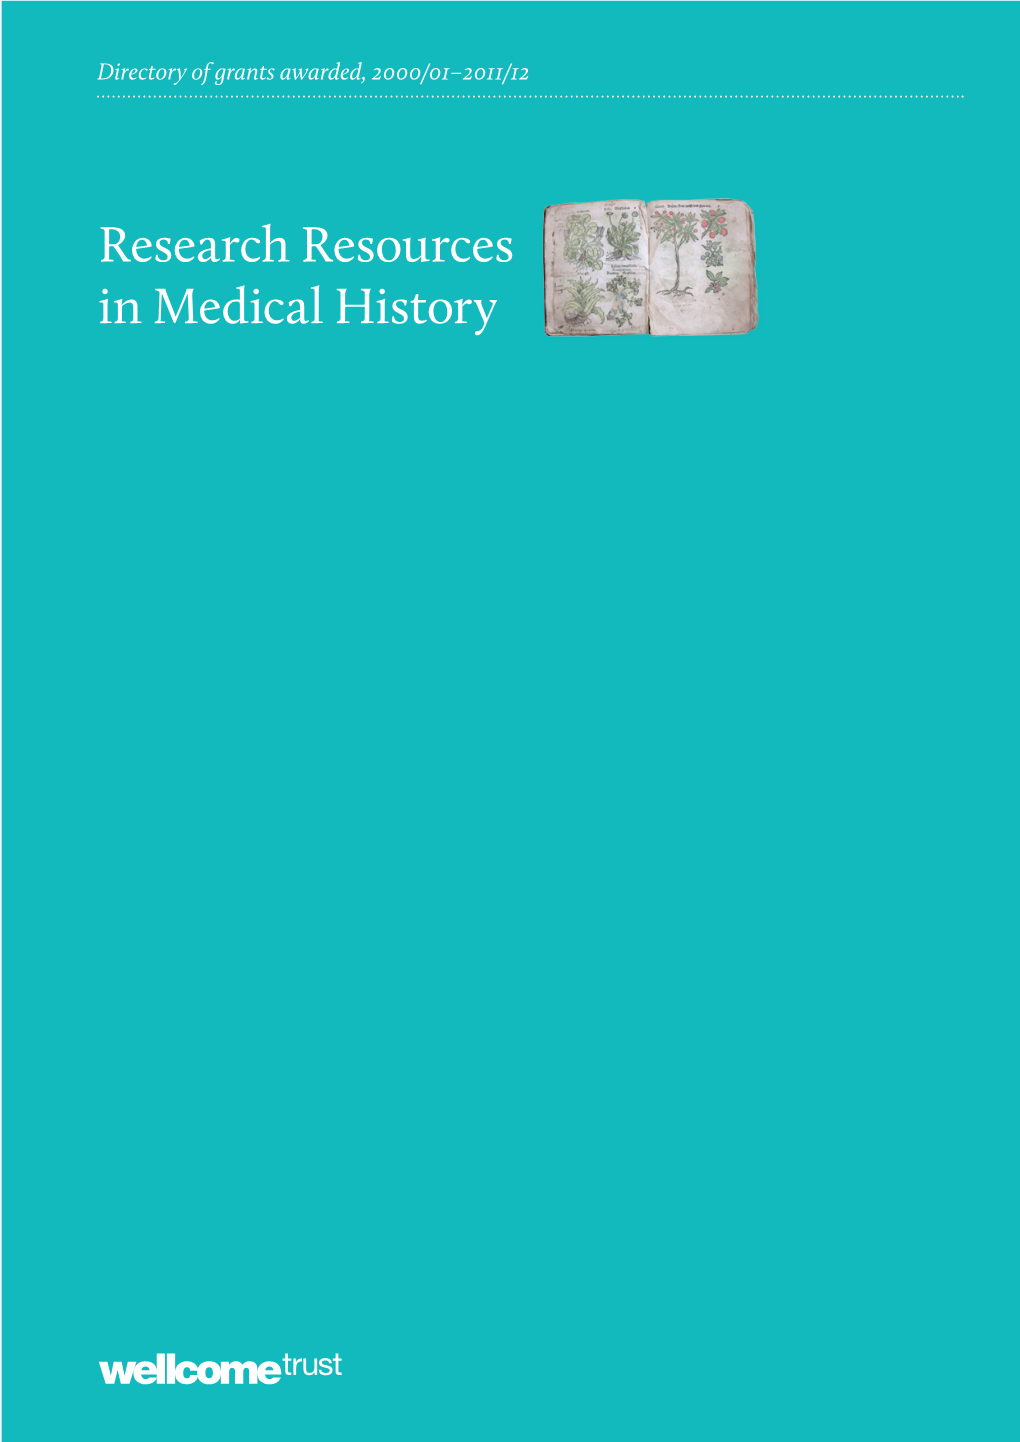 Research Resources in Medical History Contents